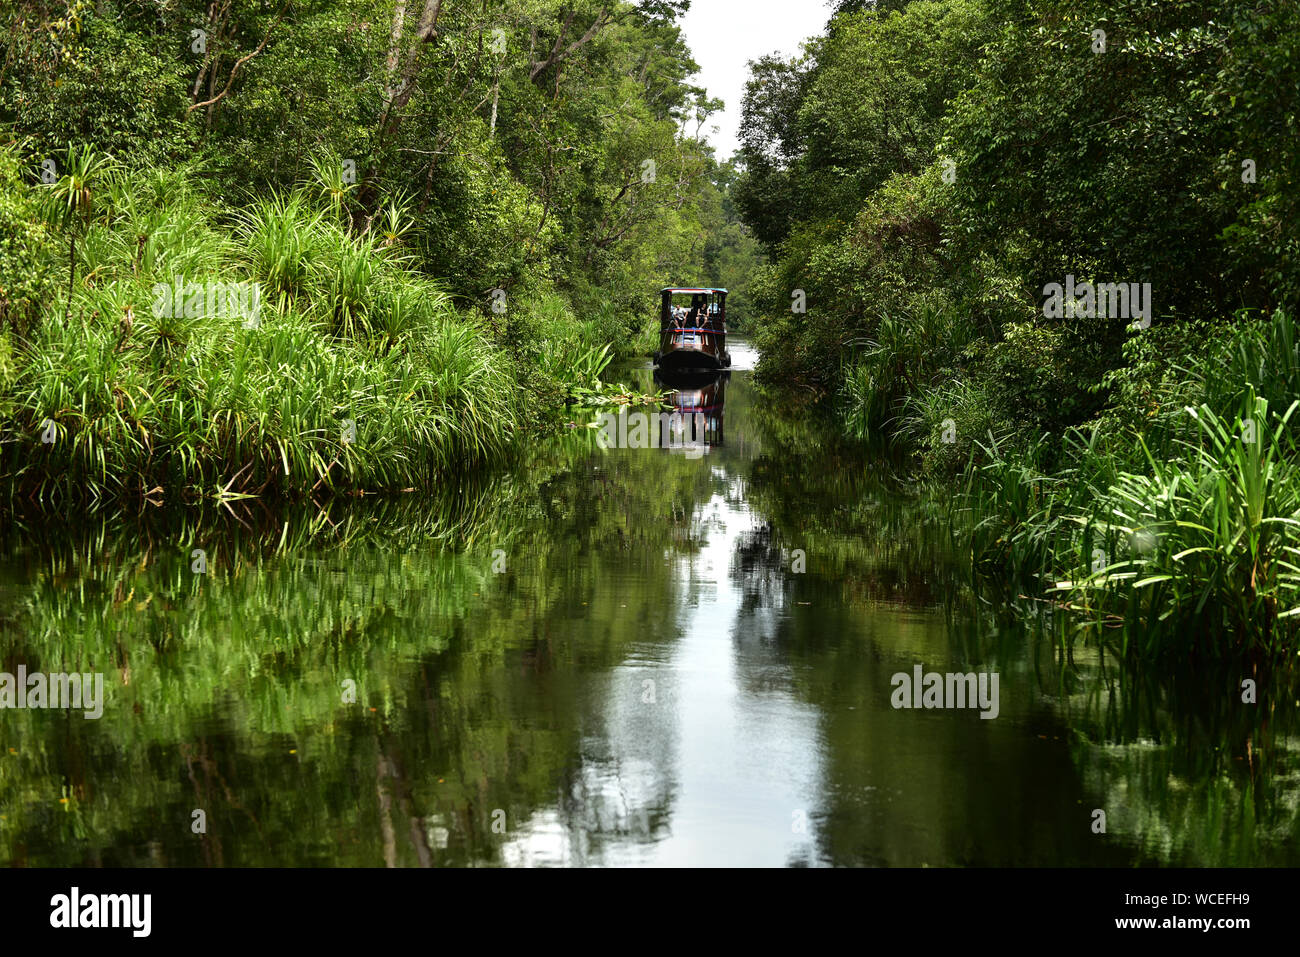 Klotok, a traditional wooden boat,  navigates the Sekonyer River with tourists. Tanjung Puting National Park, Kalimantan- Borneo, Indonesia Stock Photo